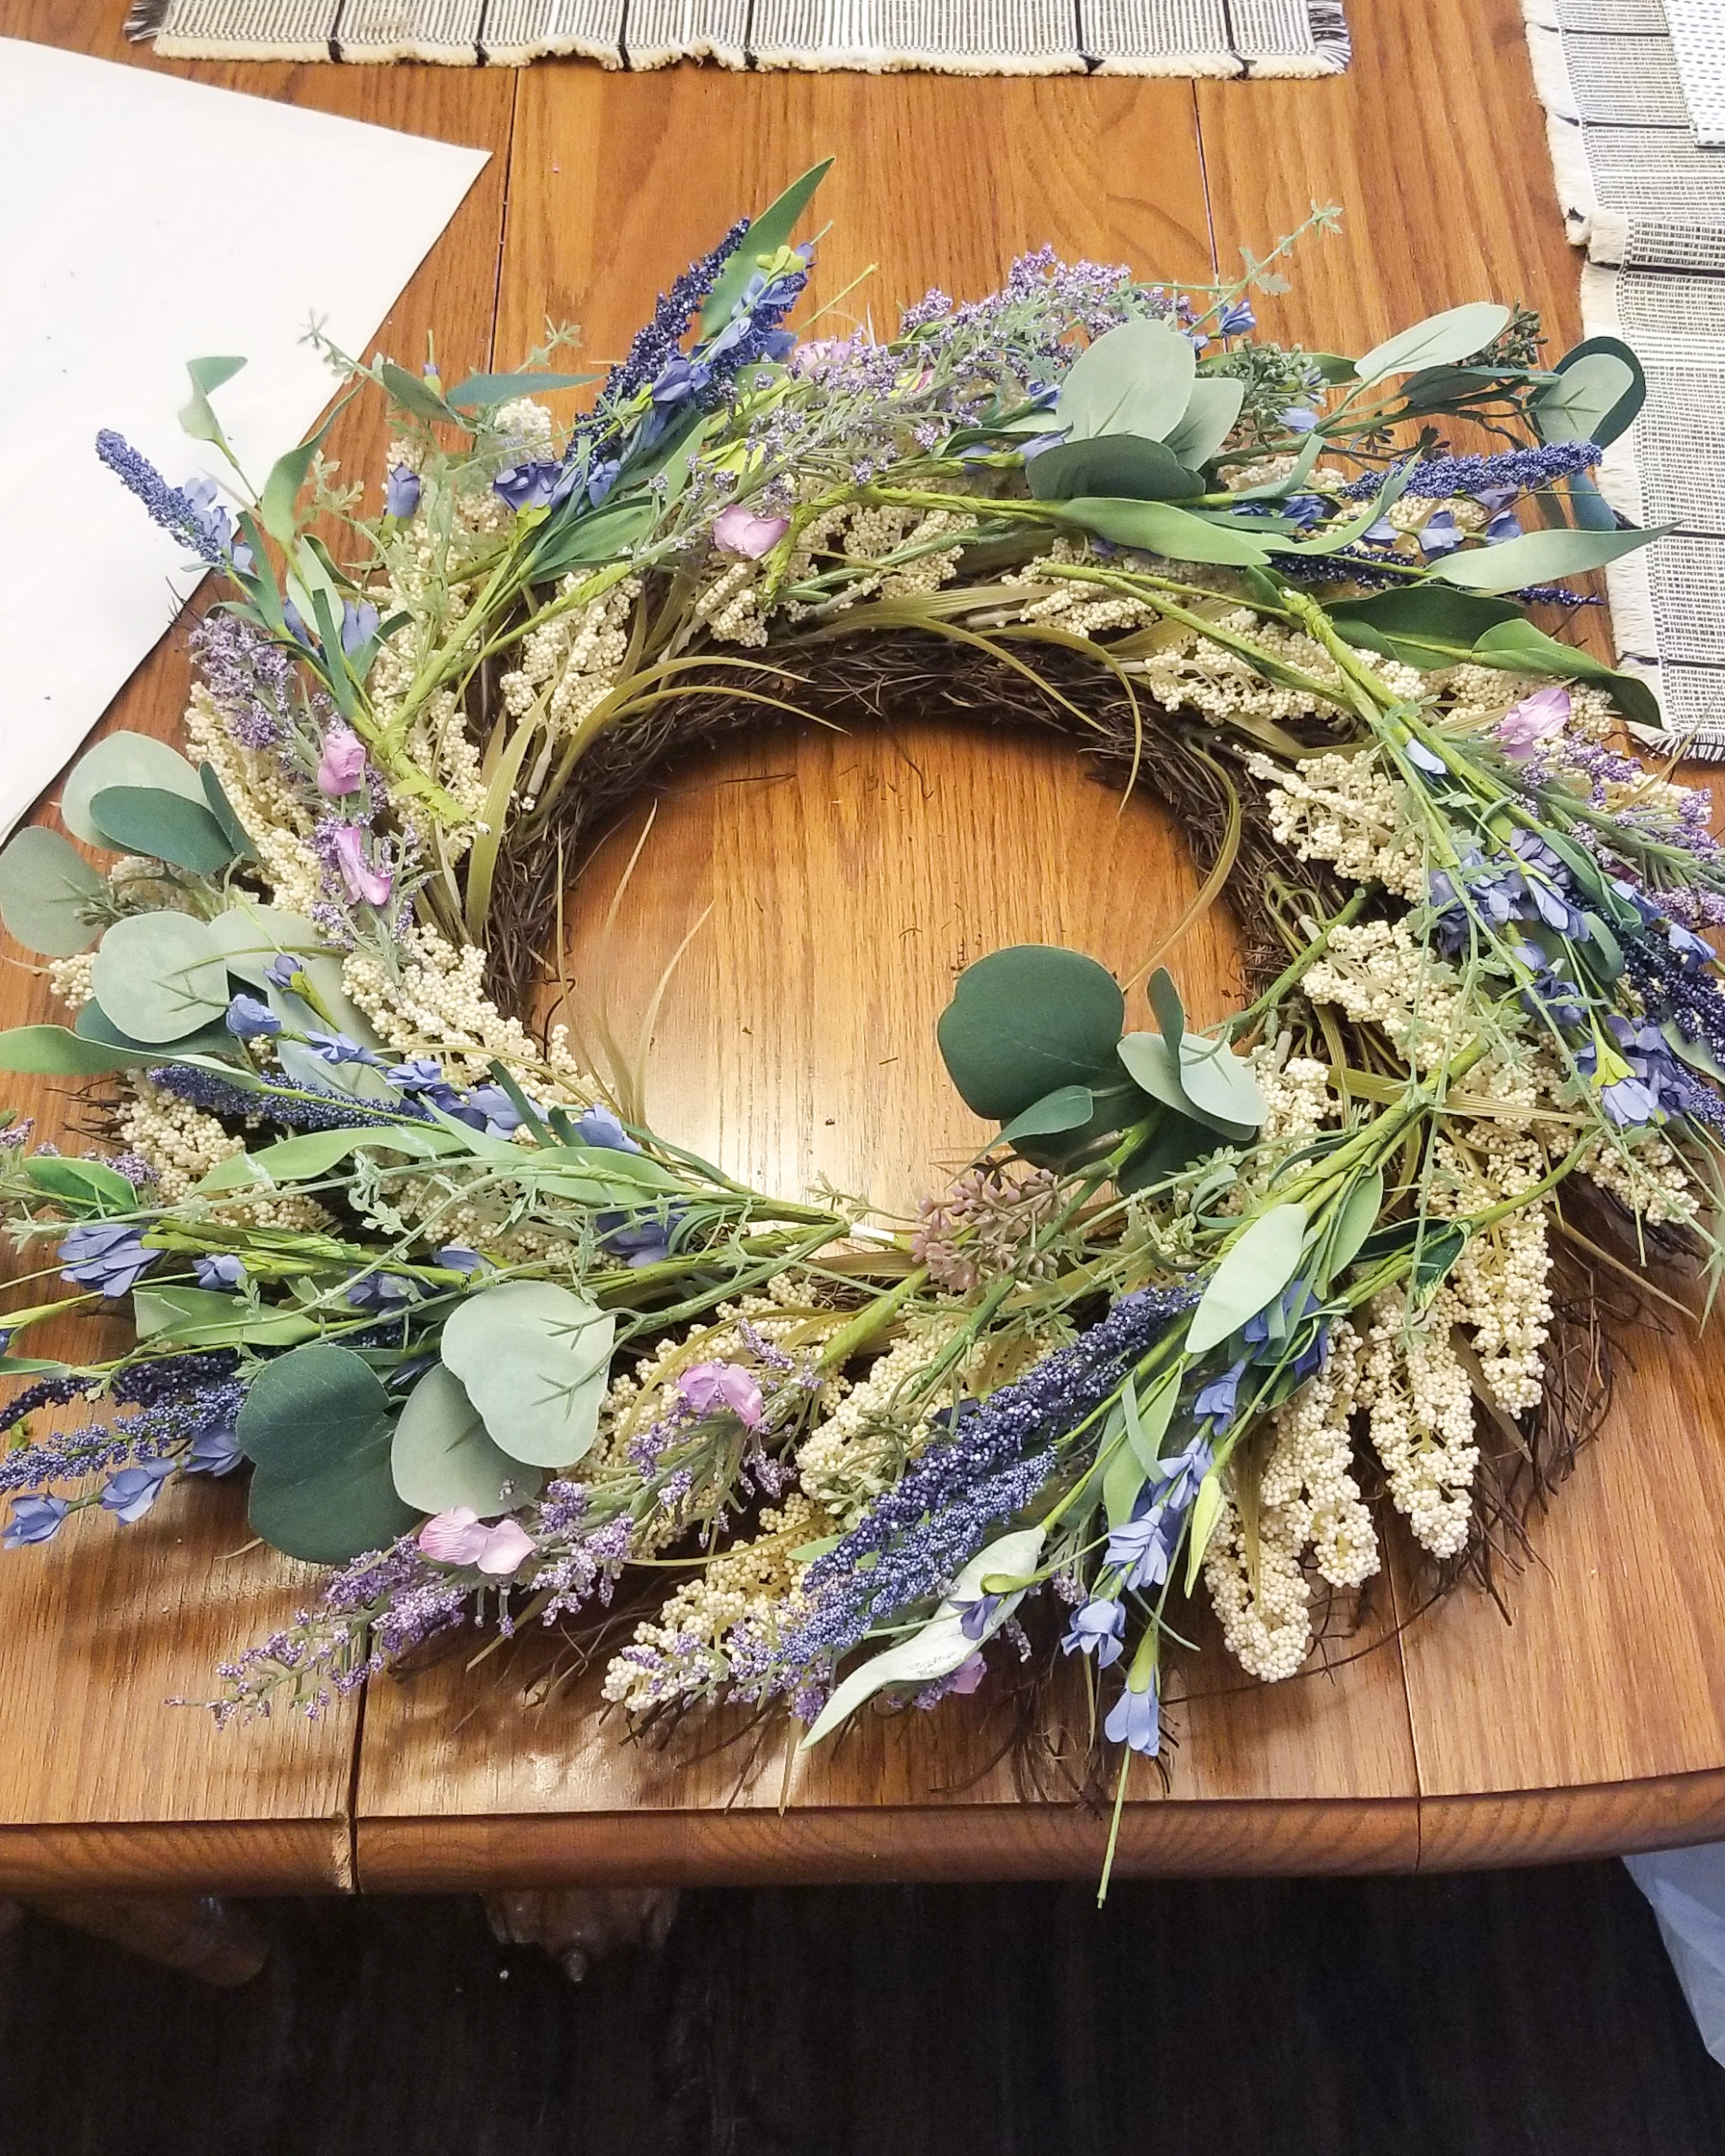 Arranging the components of my spring wreath